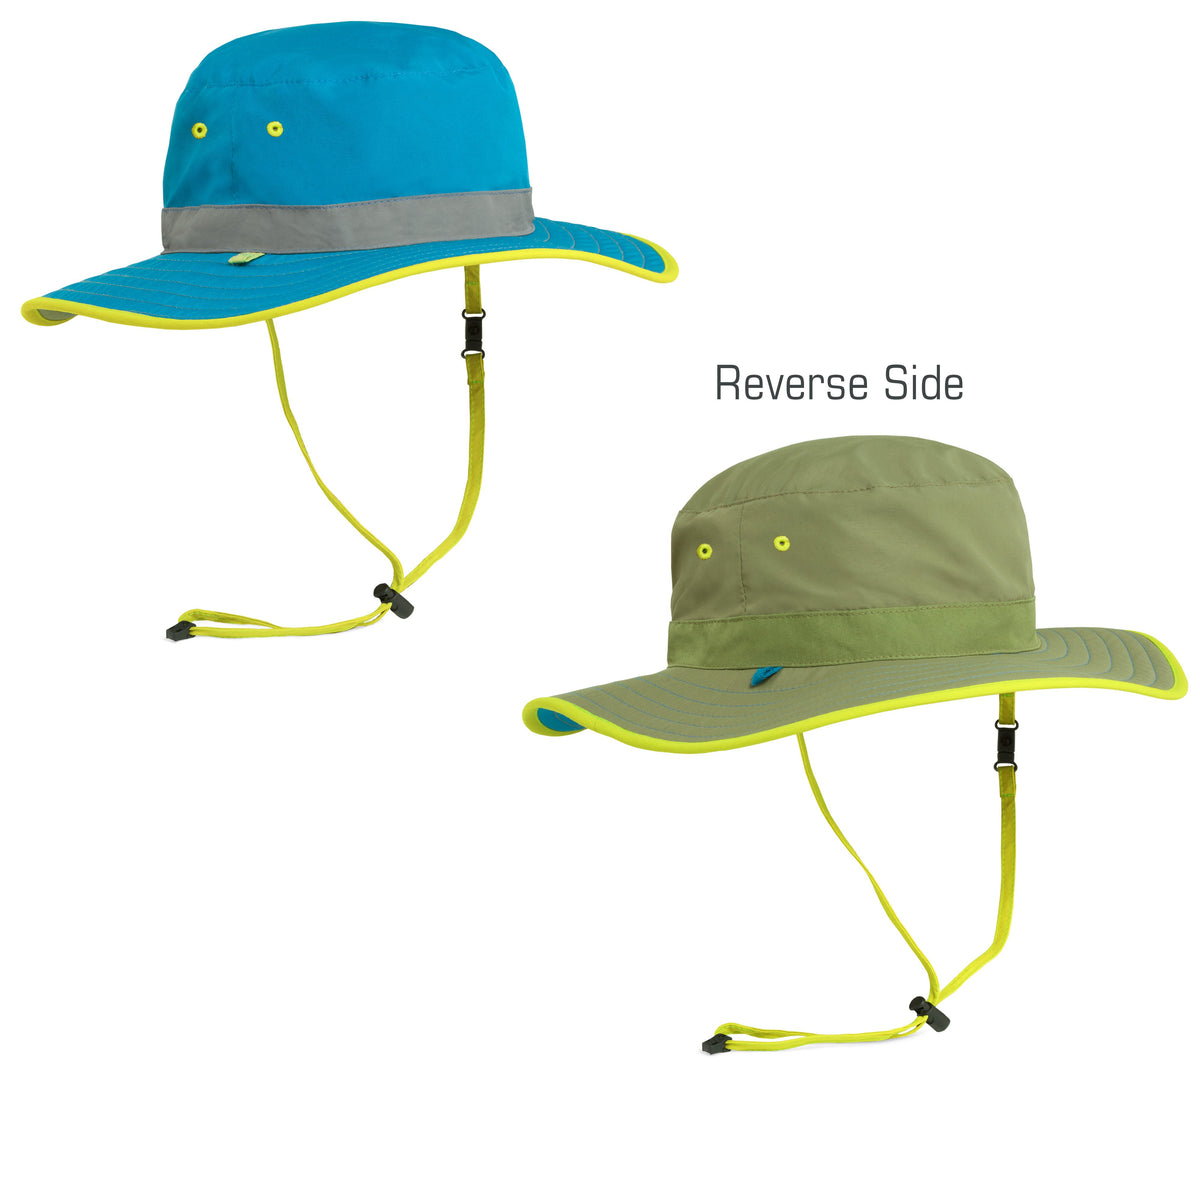 Hat and Boonie Sizing Information and Chart